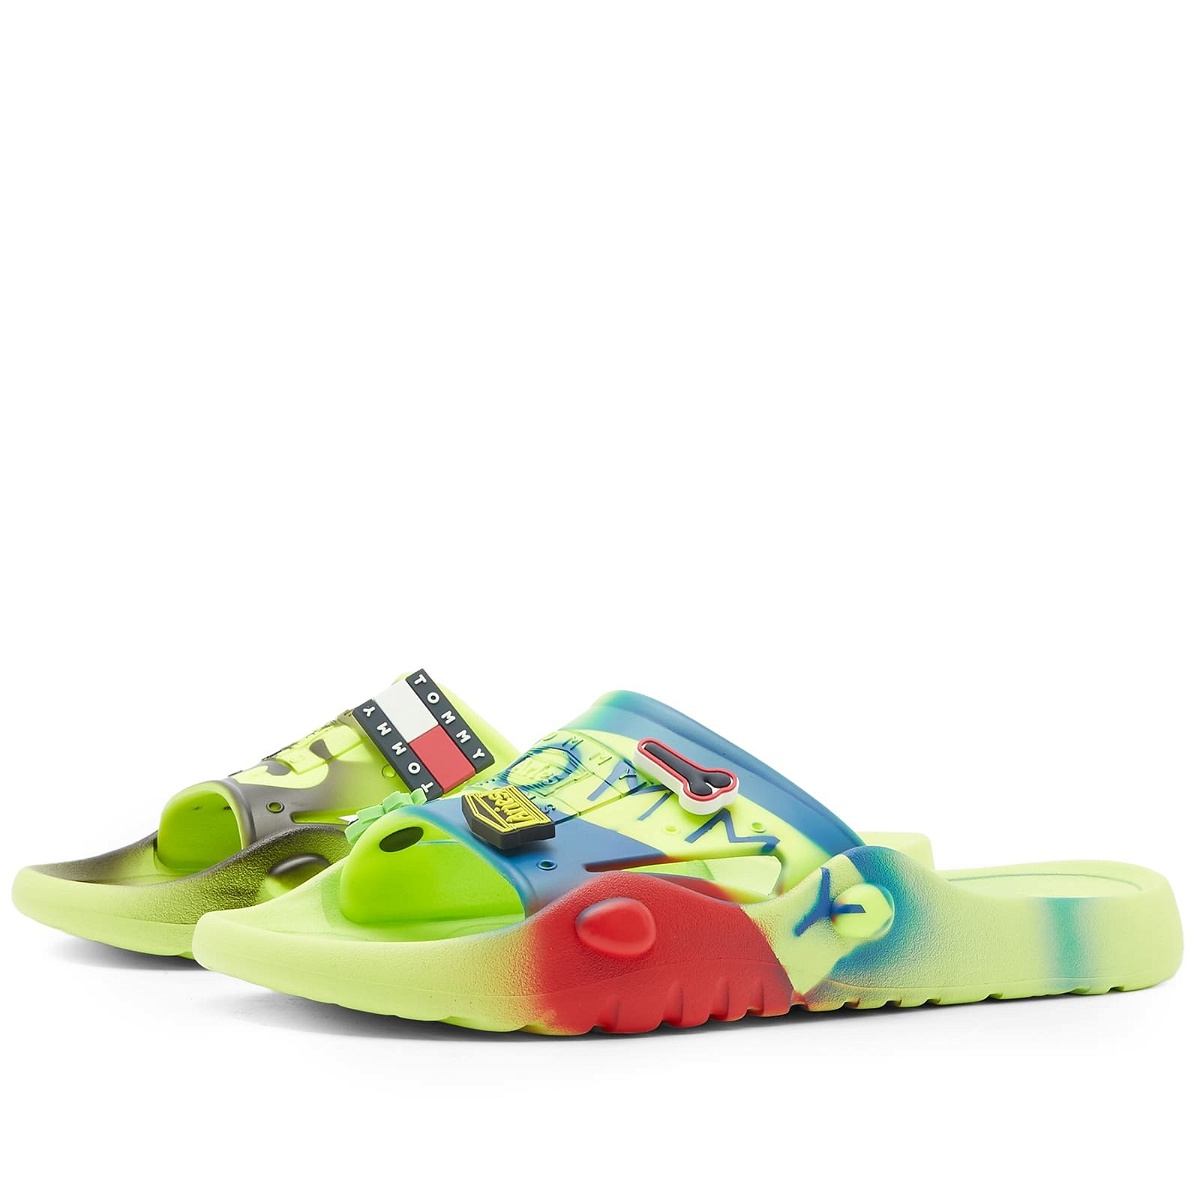 Tommy Jeans x Aries Heritage Pool Slide in Safety Yellow Tommy Jeans